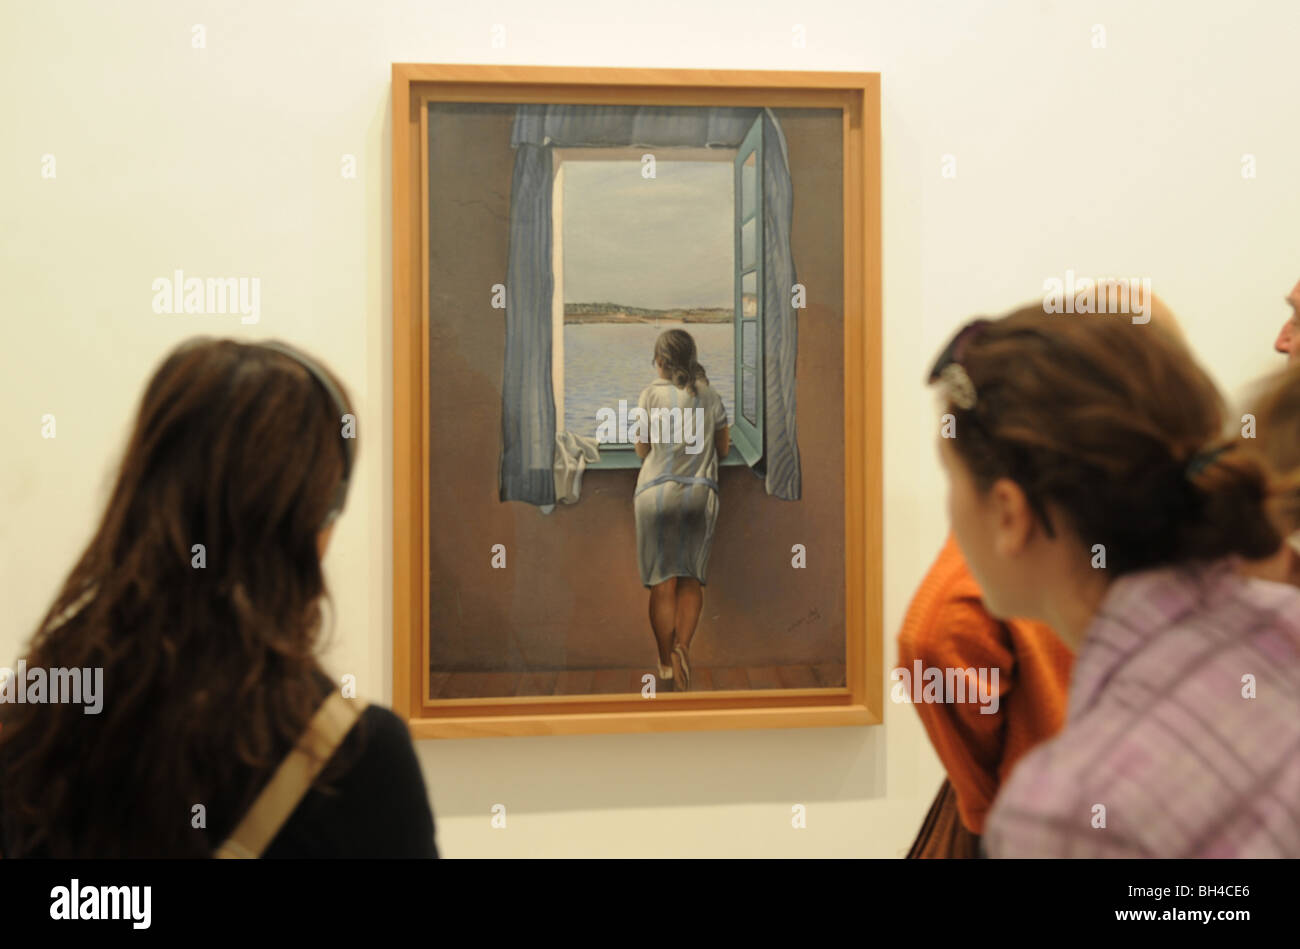 Woman at the Window (Muchacha en la ventana), by Salvador Dalí at the  Centro de Arte Reina Sofia in Madrid, Spain Stock Photo - Alamy